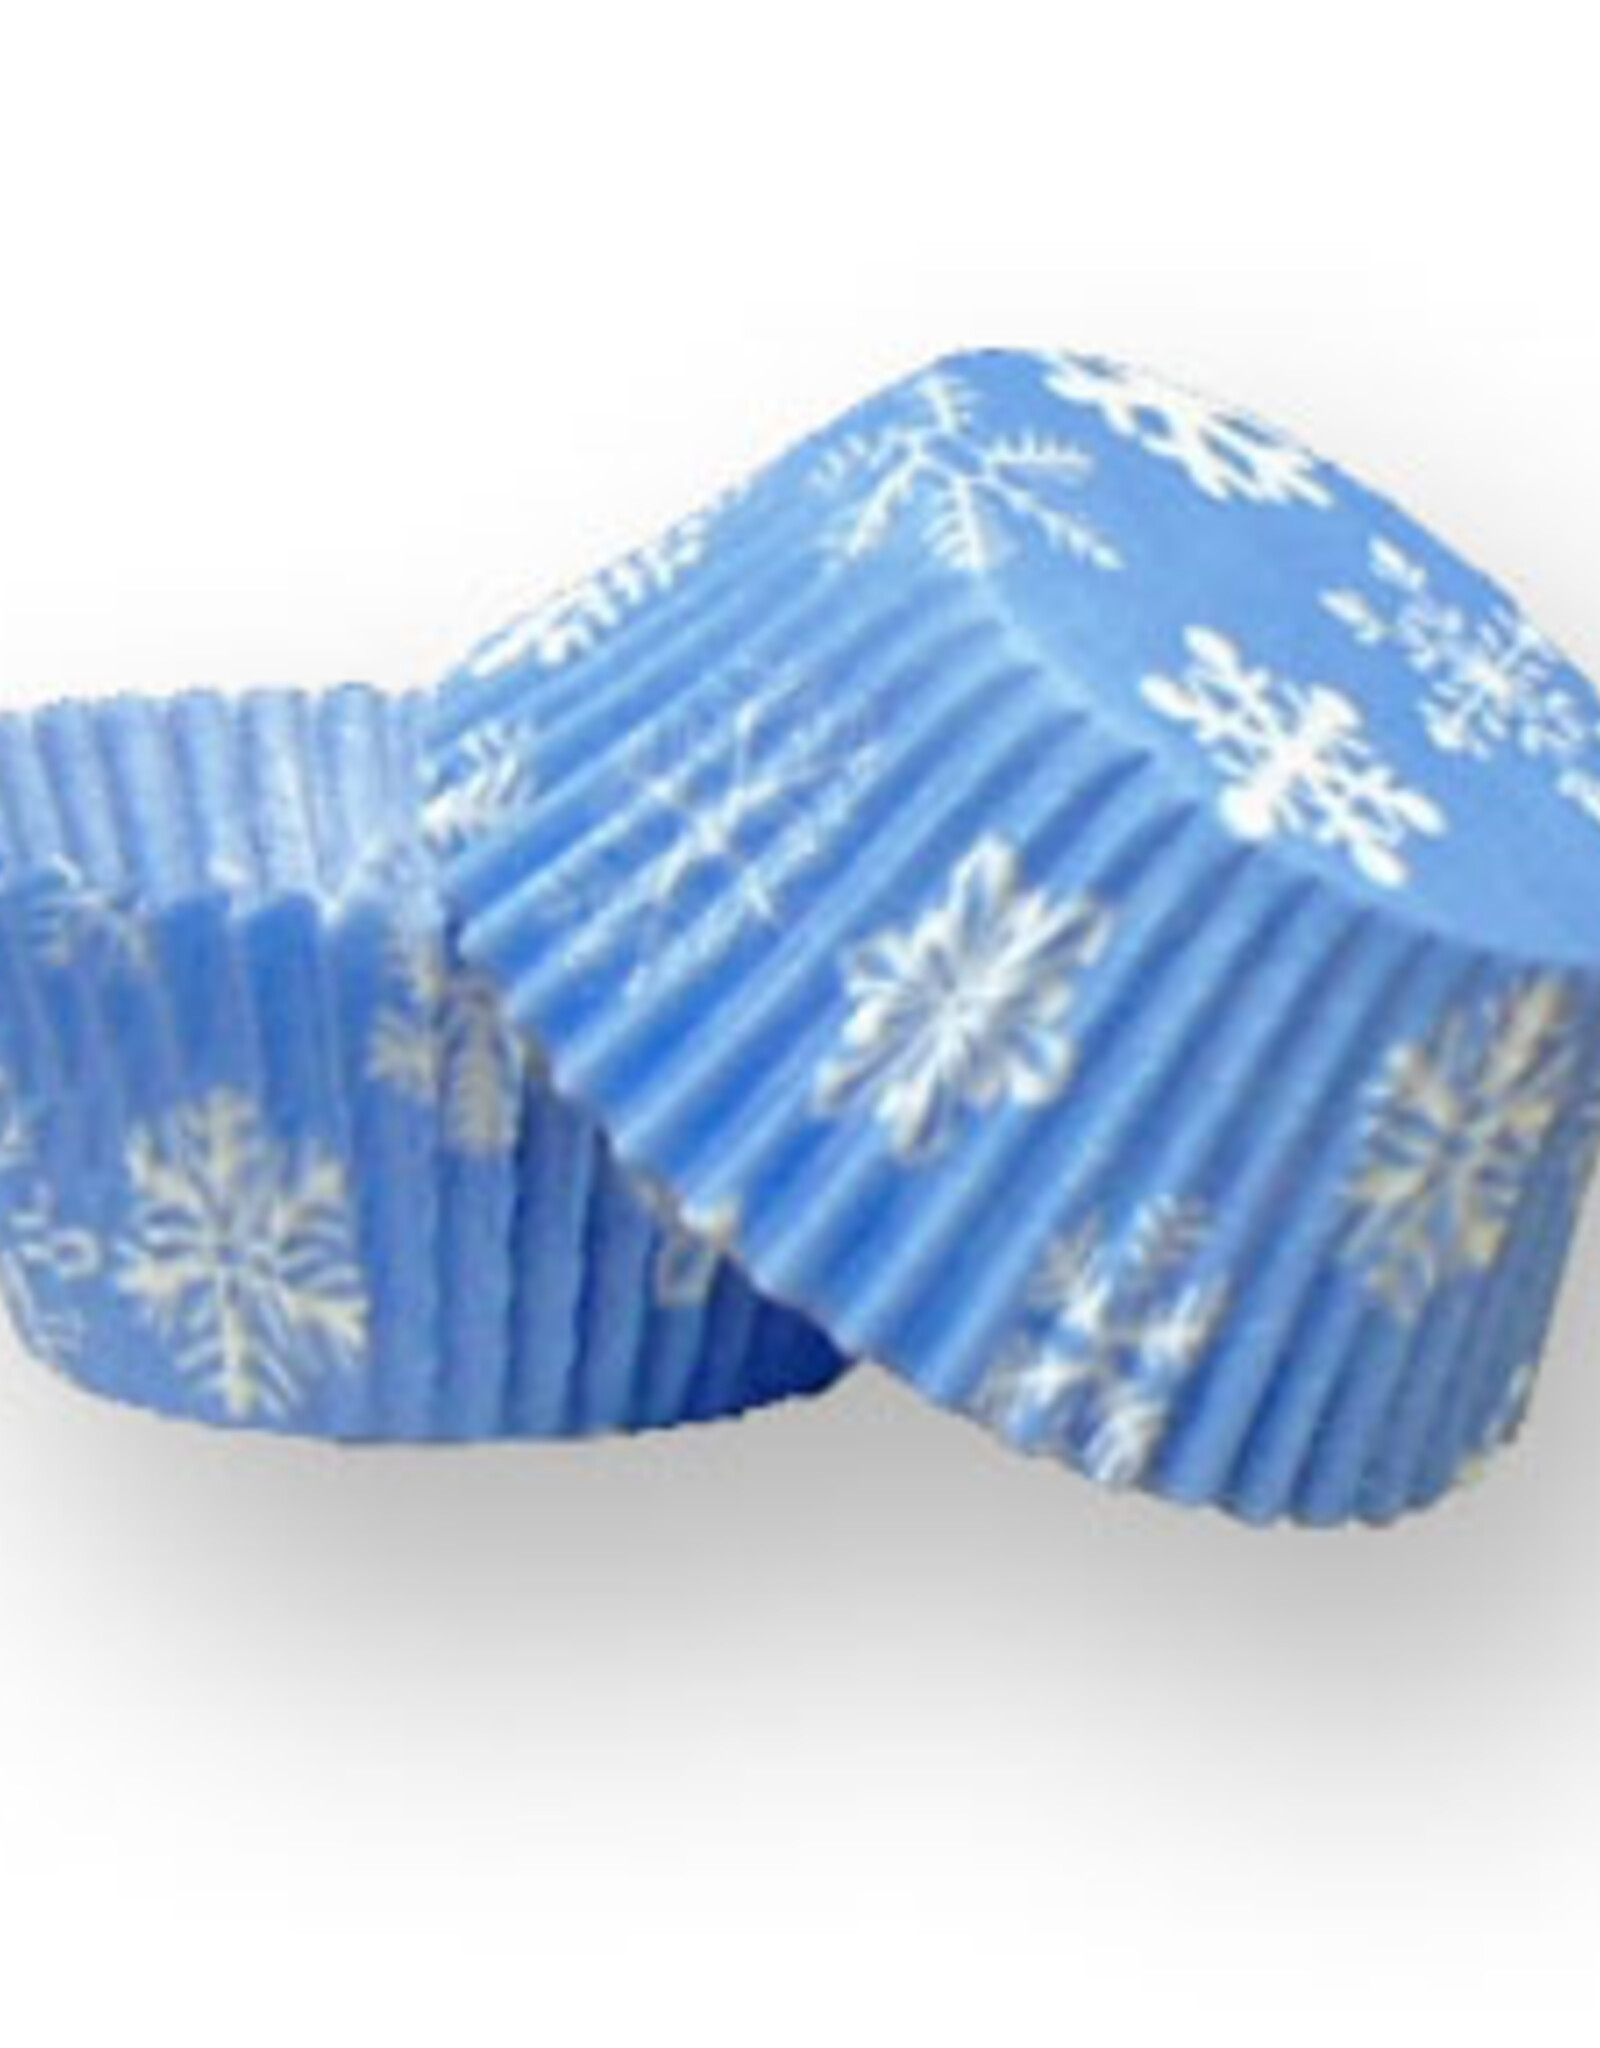 Blue Snowflake Baking Cups (30-35ct)